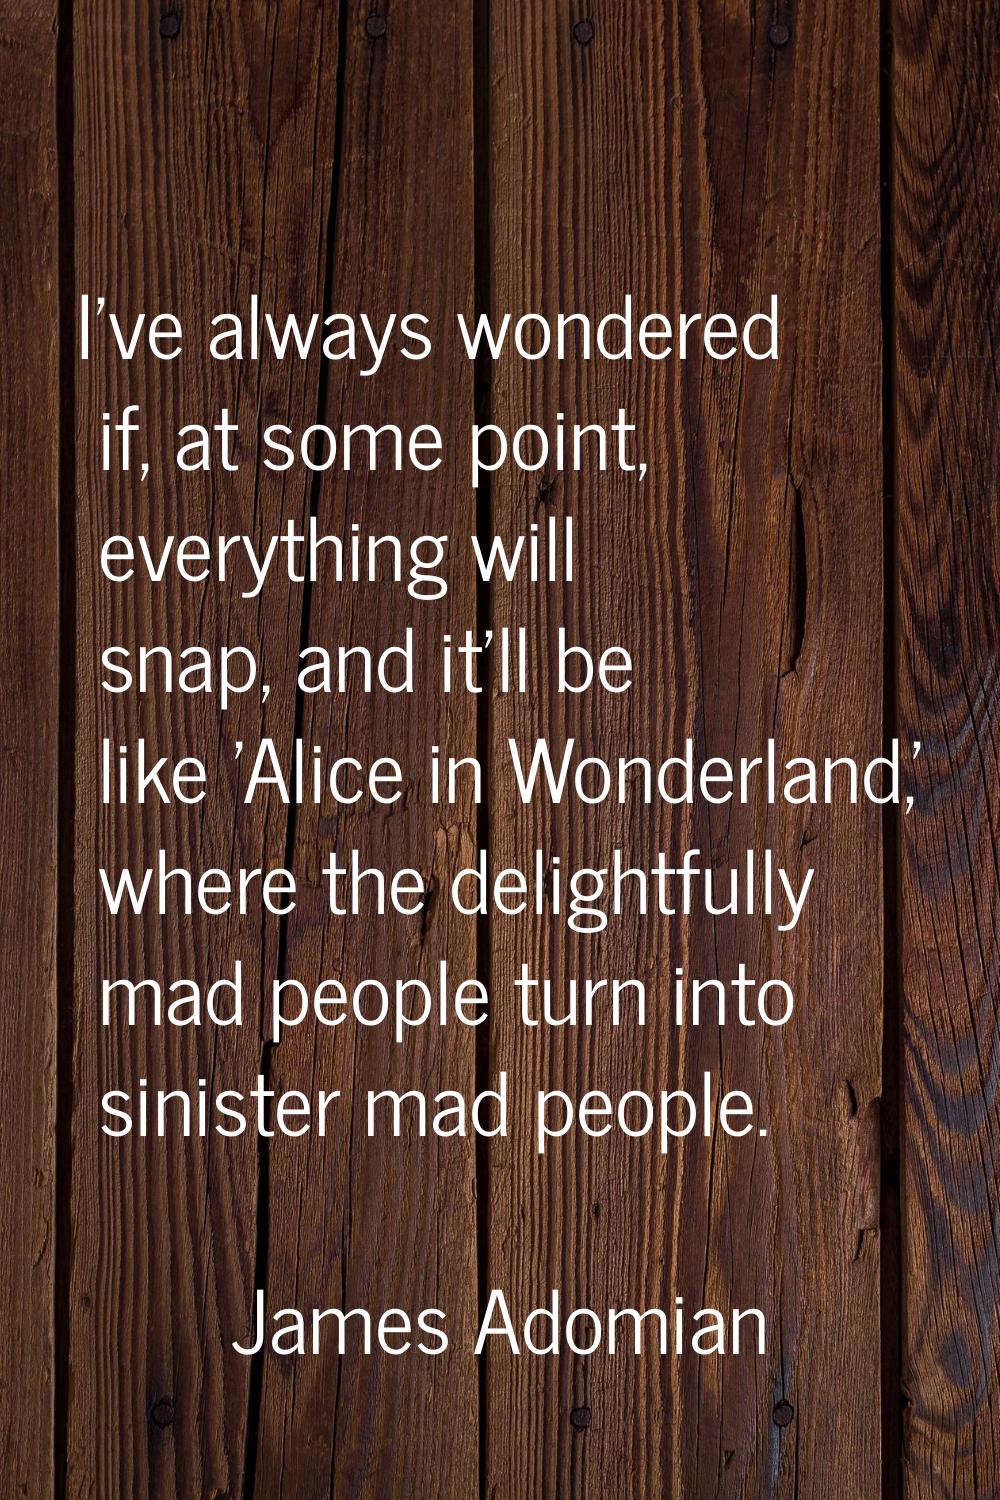 I've always wondered if, at some point, everything will snap, and it'll be like 'Alice in Wonderlan